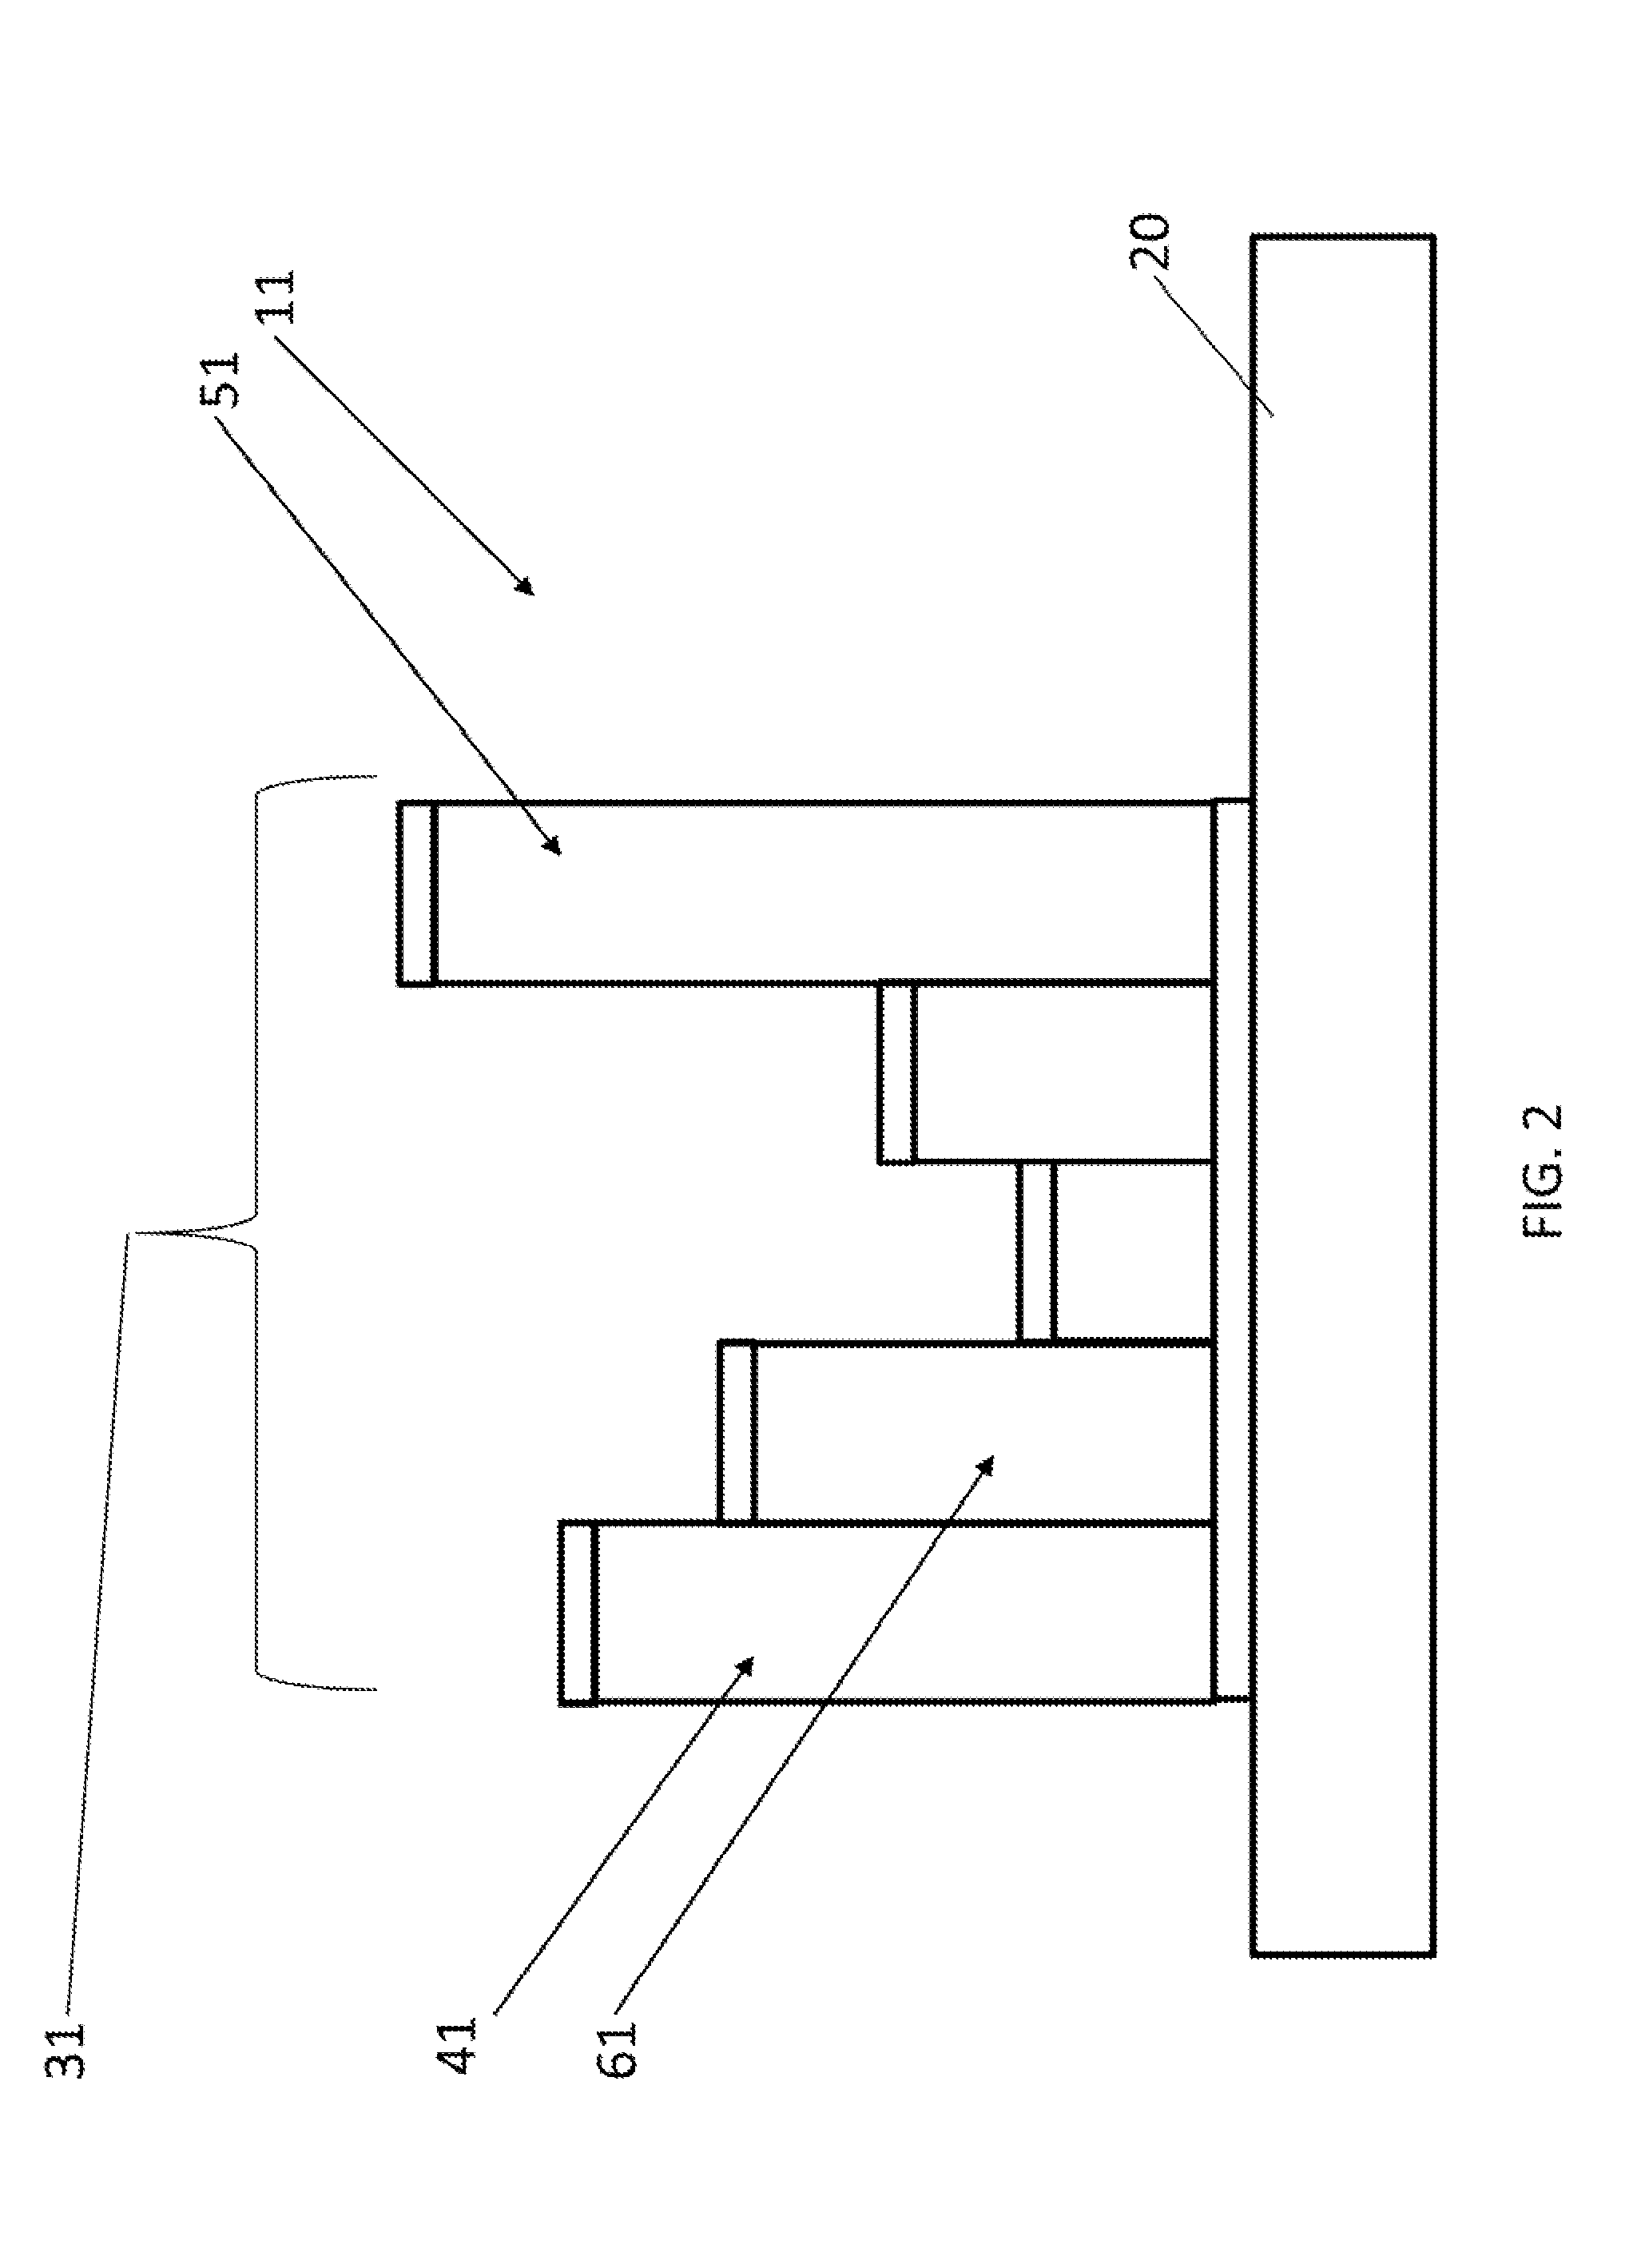 Method and apparatus for multiplexed fabry-perot spectroscopy